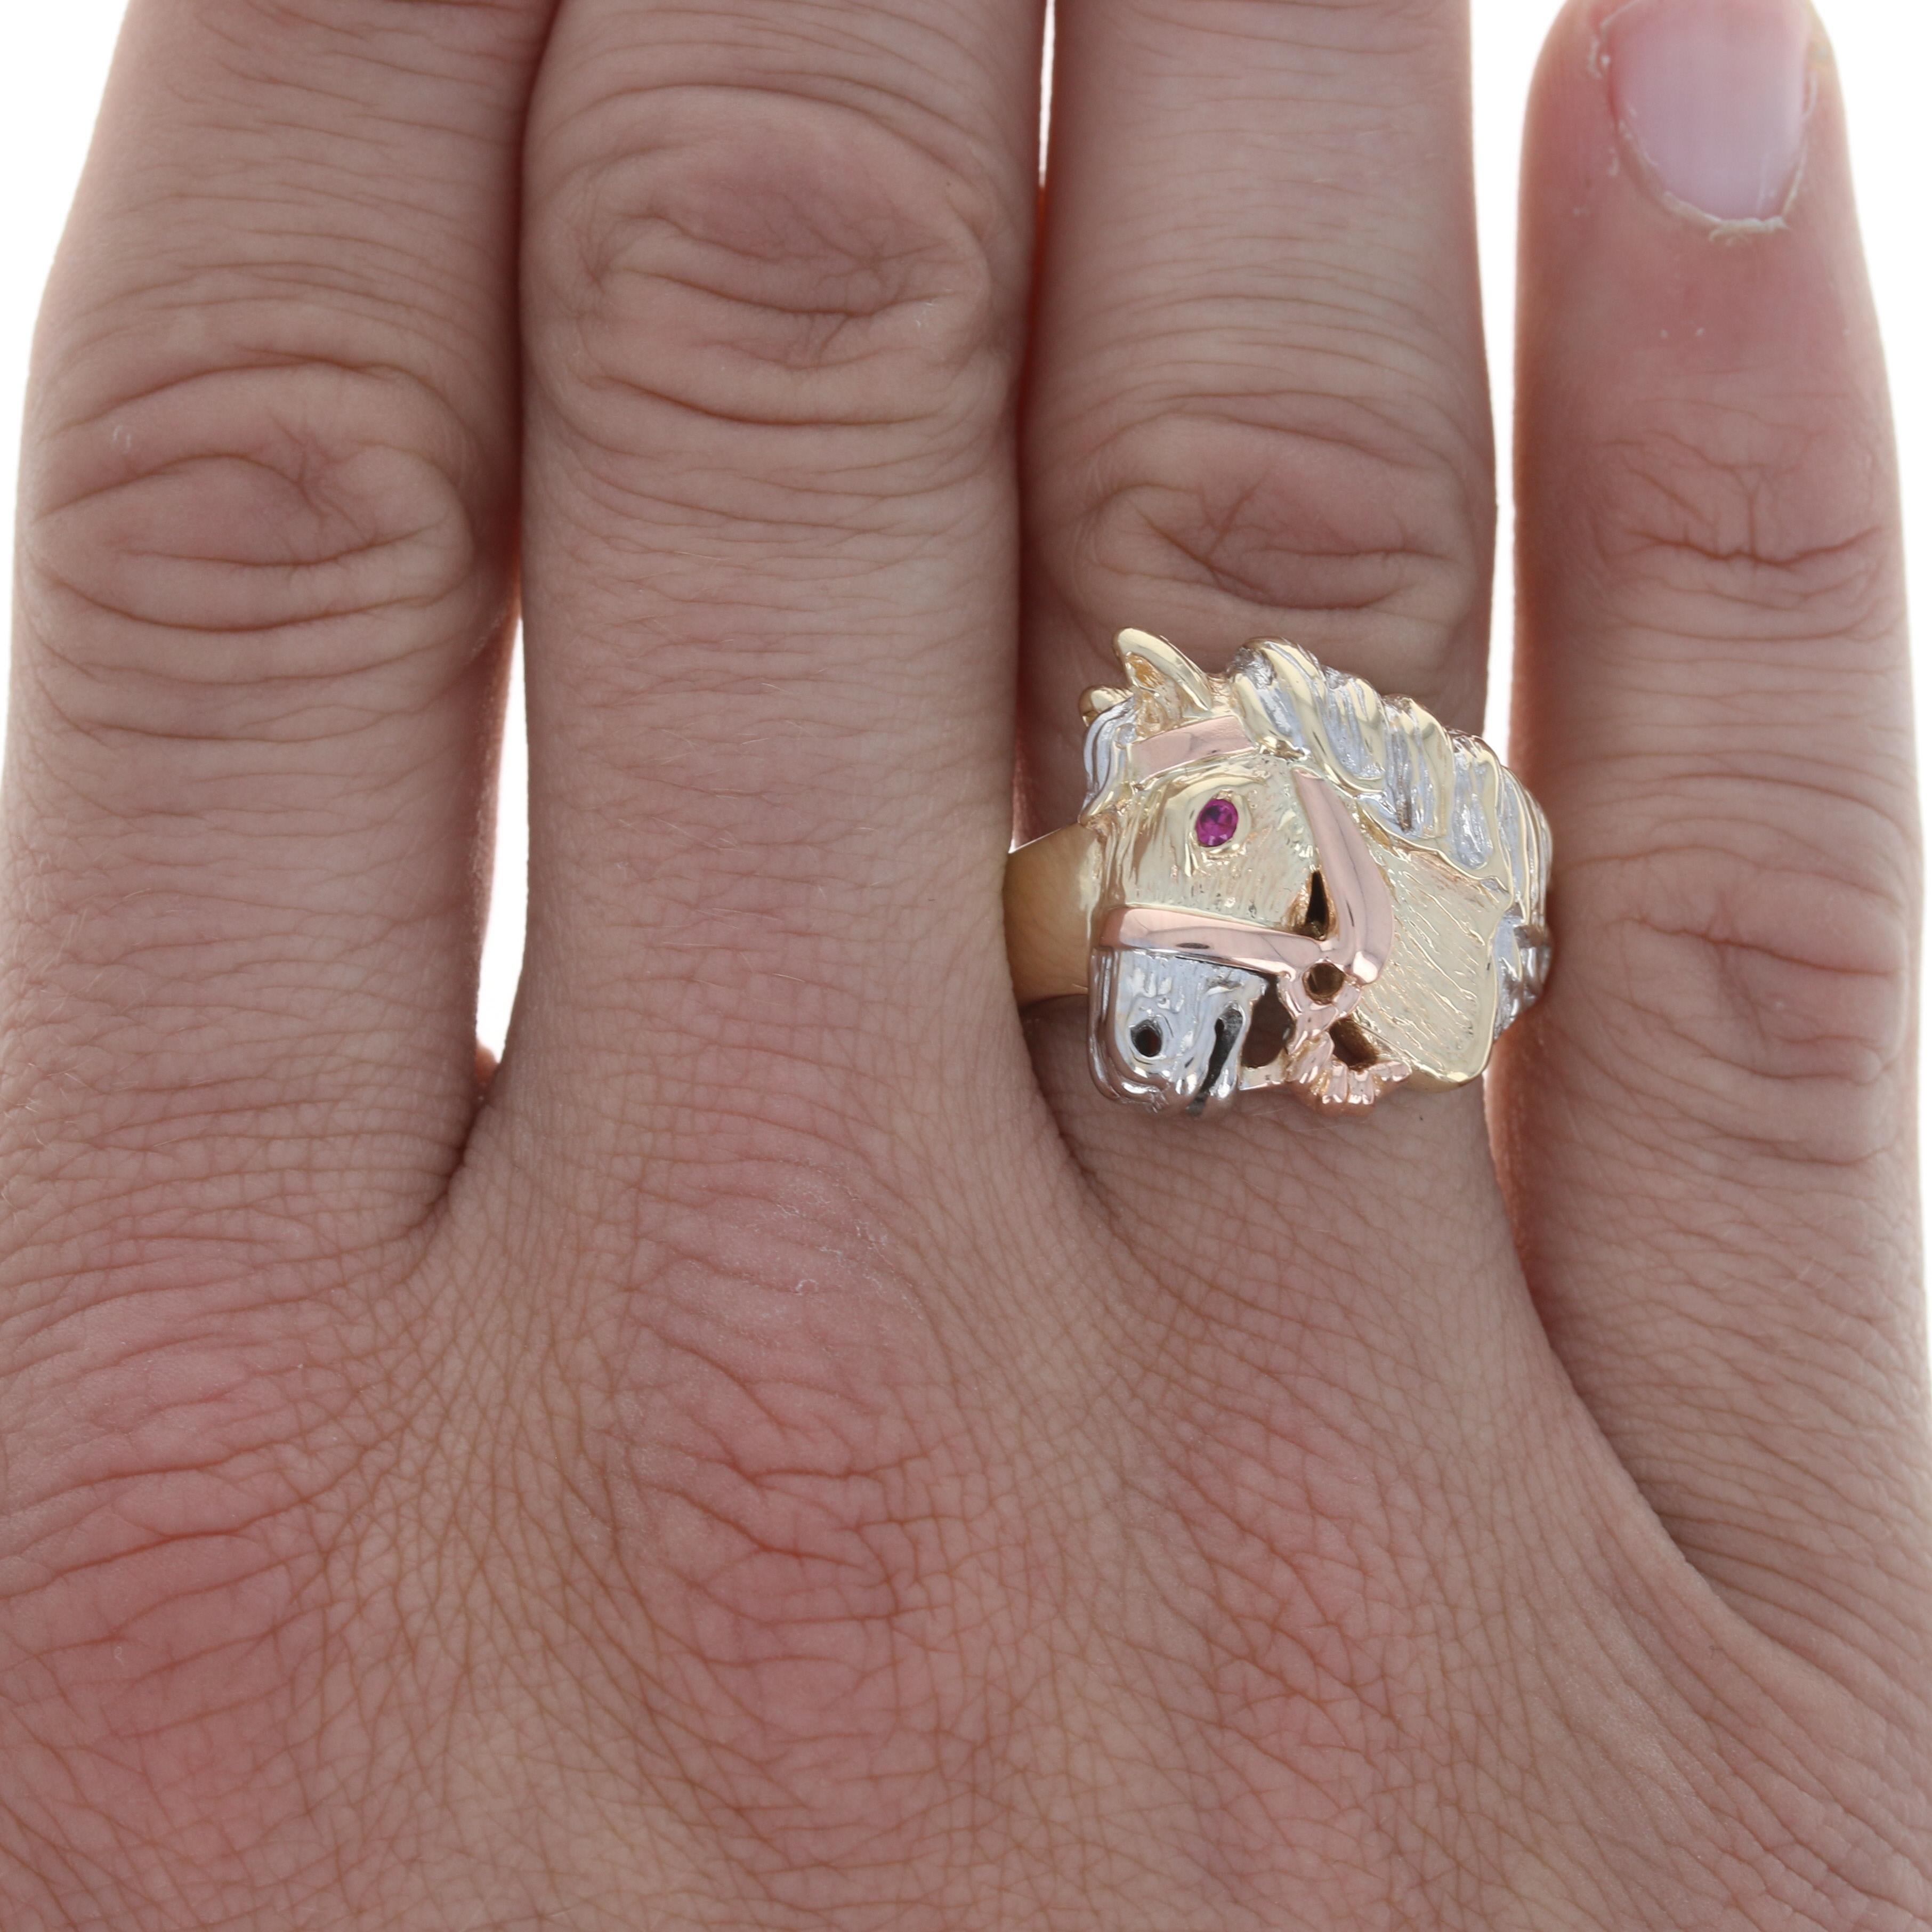 Size: 11 3/4
Sizing Fee: Down 3 sizes for a $30 fee or up 2 sizes for a $35 fee

Metal Content: 14k Yellow, White, & Rose Gold

Stone Information: 
Synthetic Ruby
Carat: .05ct
Cut: Round
Color: Pinkish Red

Theme: Horse
Features: Smooth & Textured